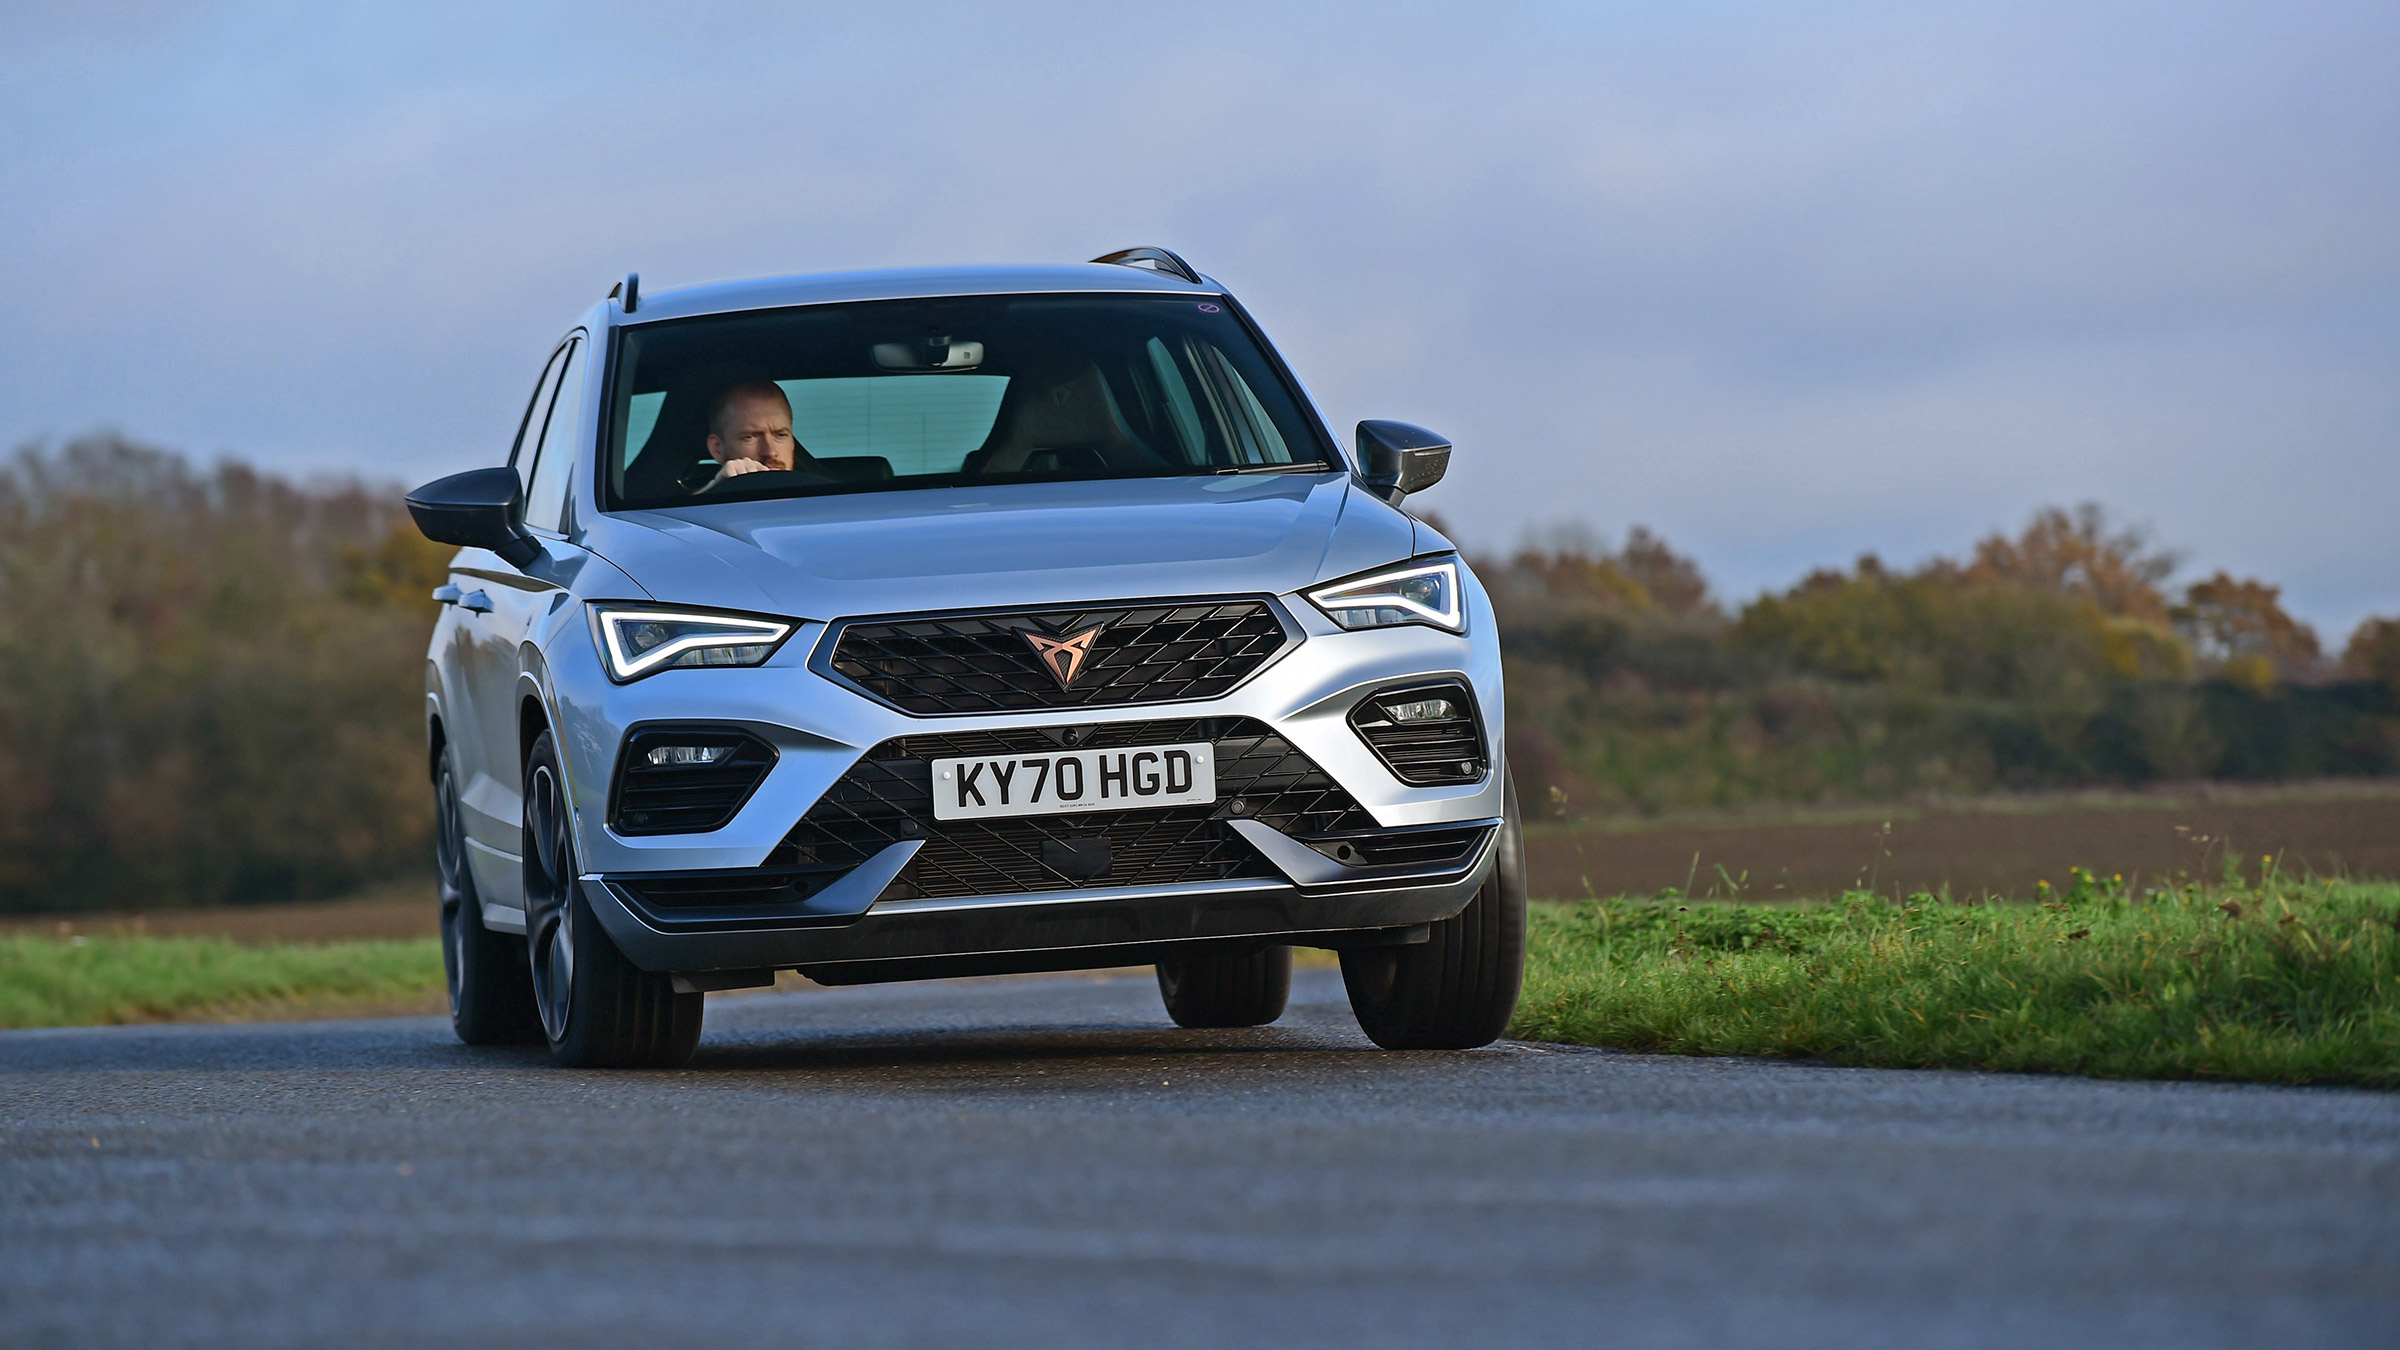 2021 Cupra Ateca Performance SUV Gets Styling And Tech Upgrades, Retains  296 HP Powertrain